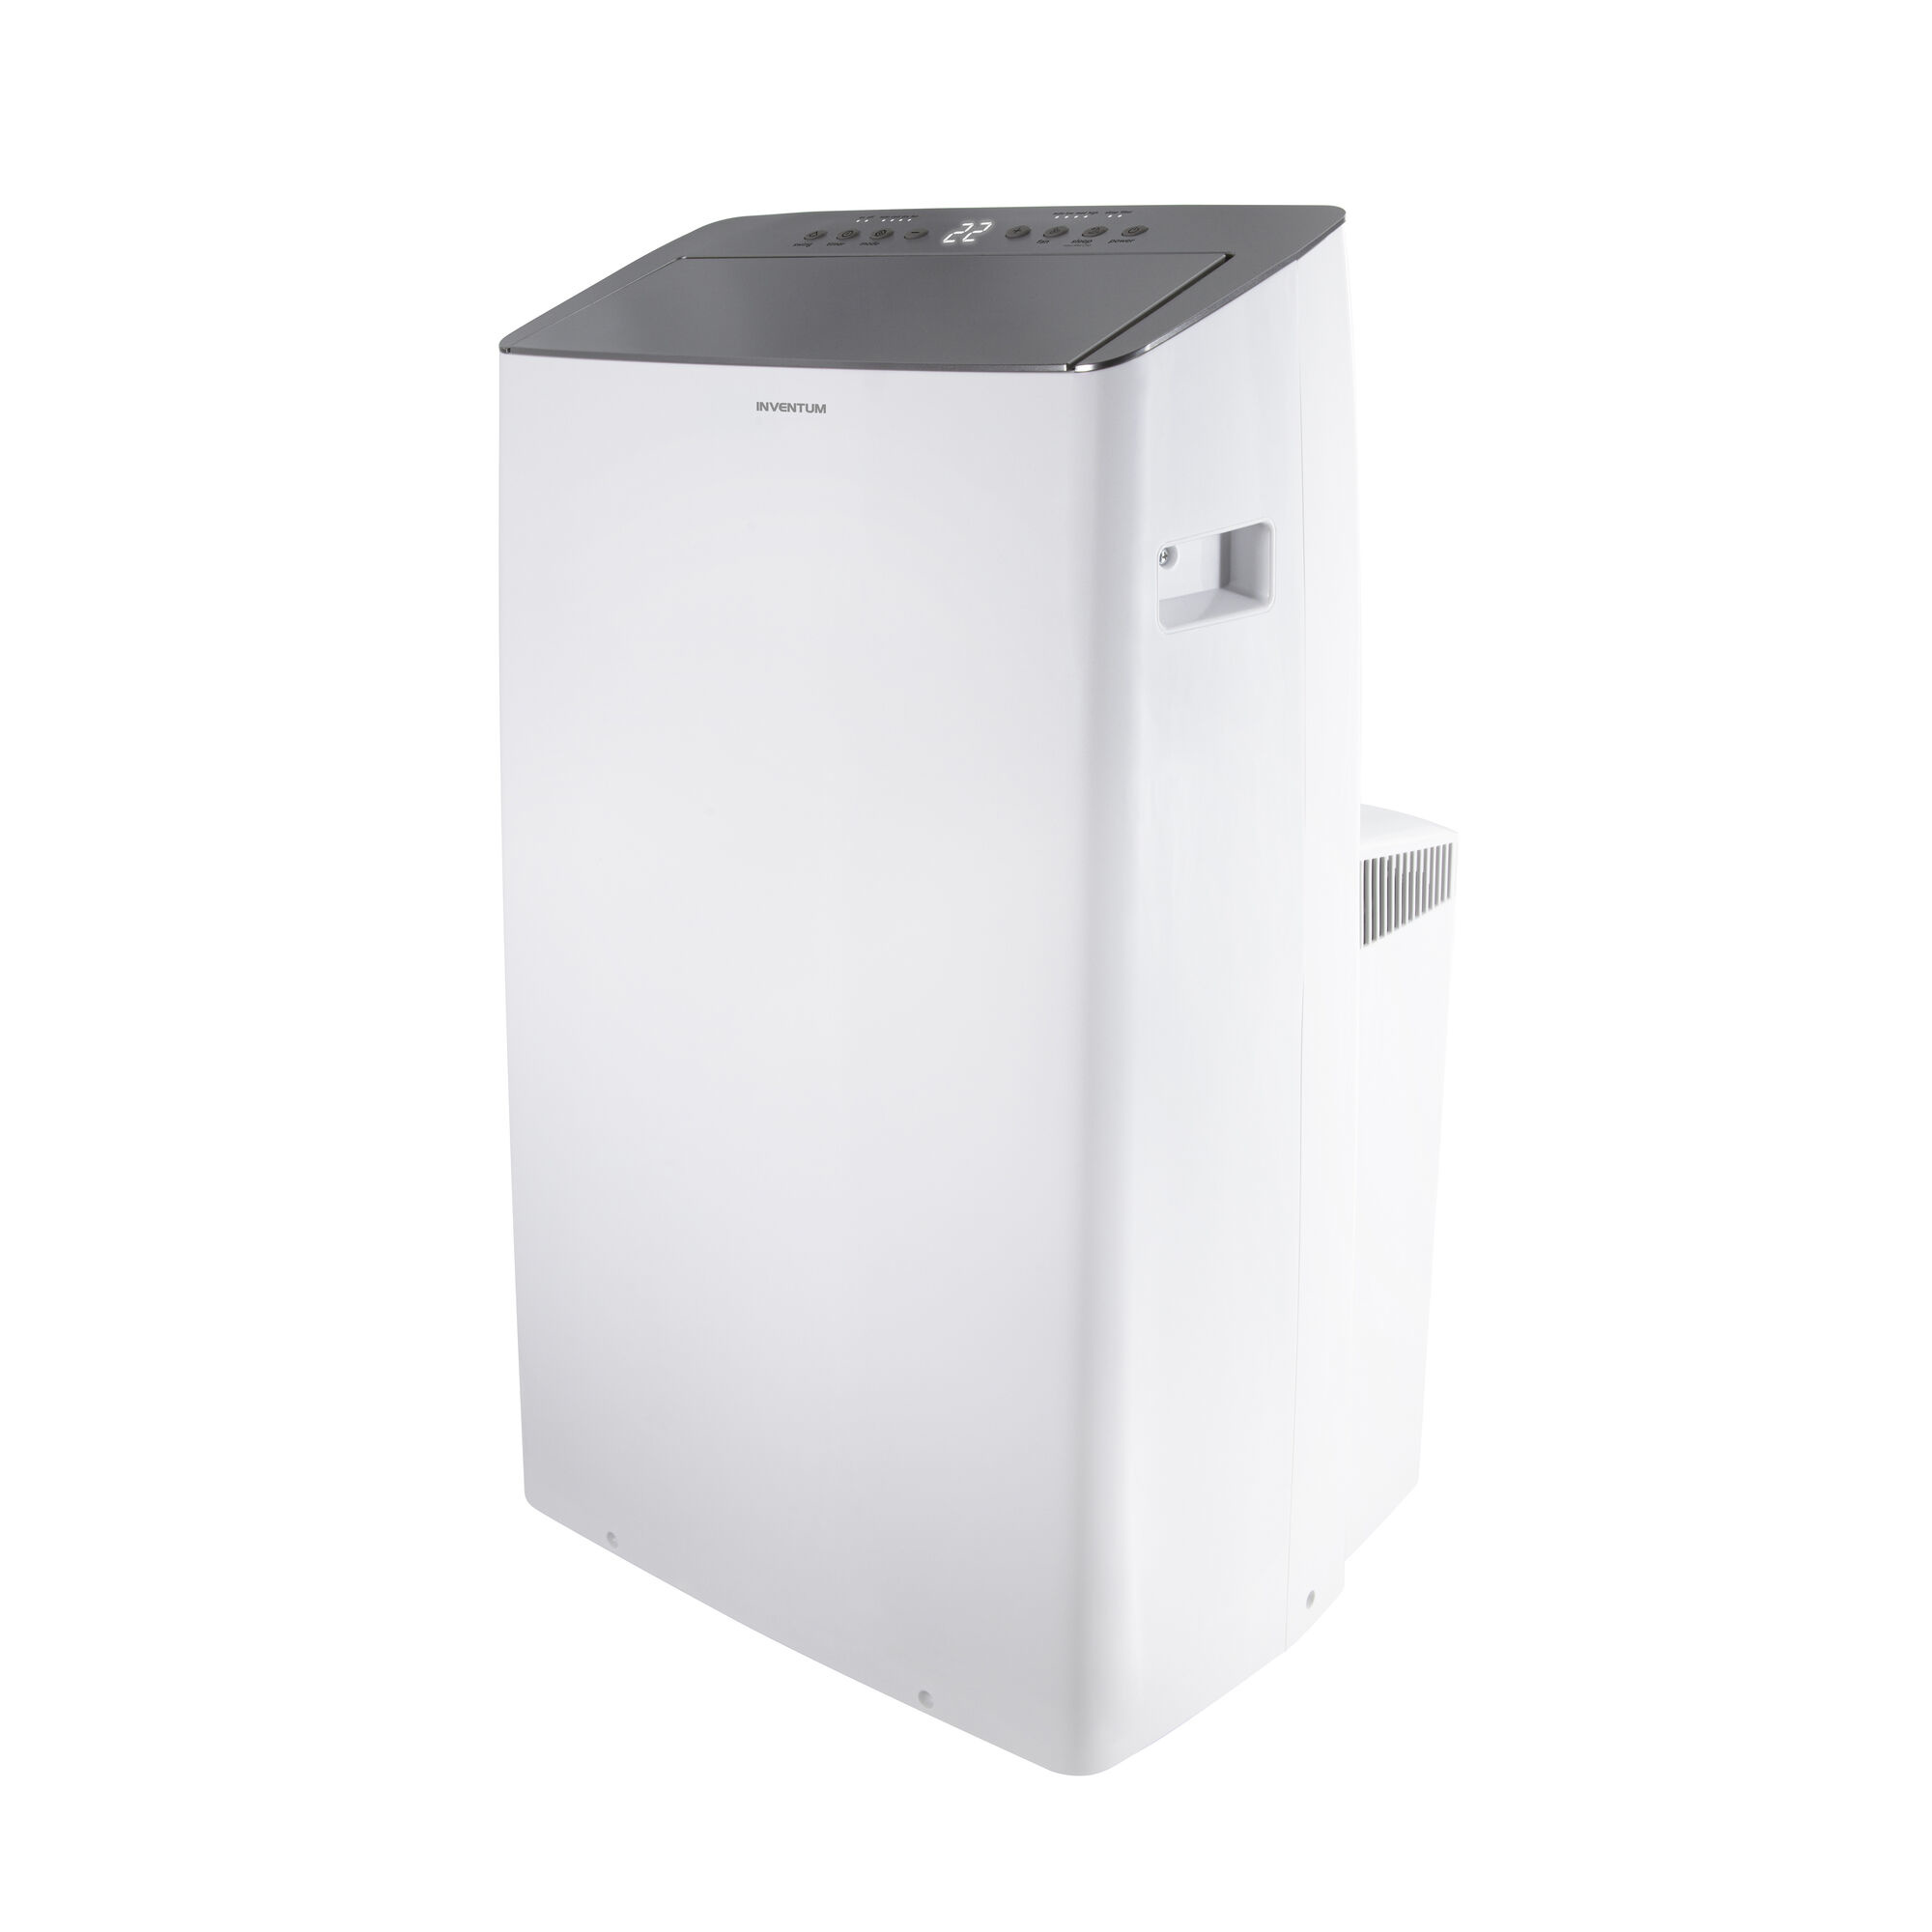 Aziatisch surfen wasmiddel Inventum AC127W 3-in-1 airco - Hermans Trading Witgoed Outlet